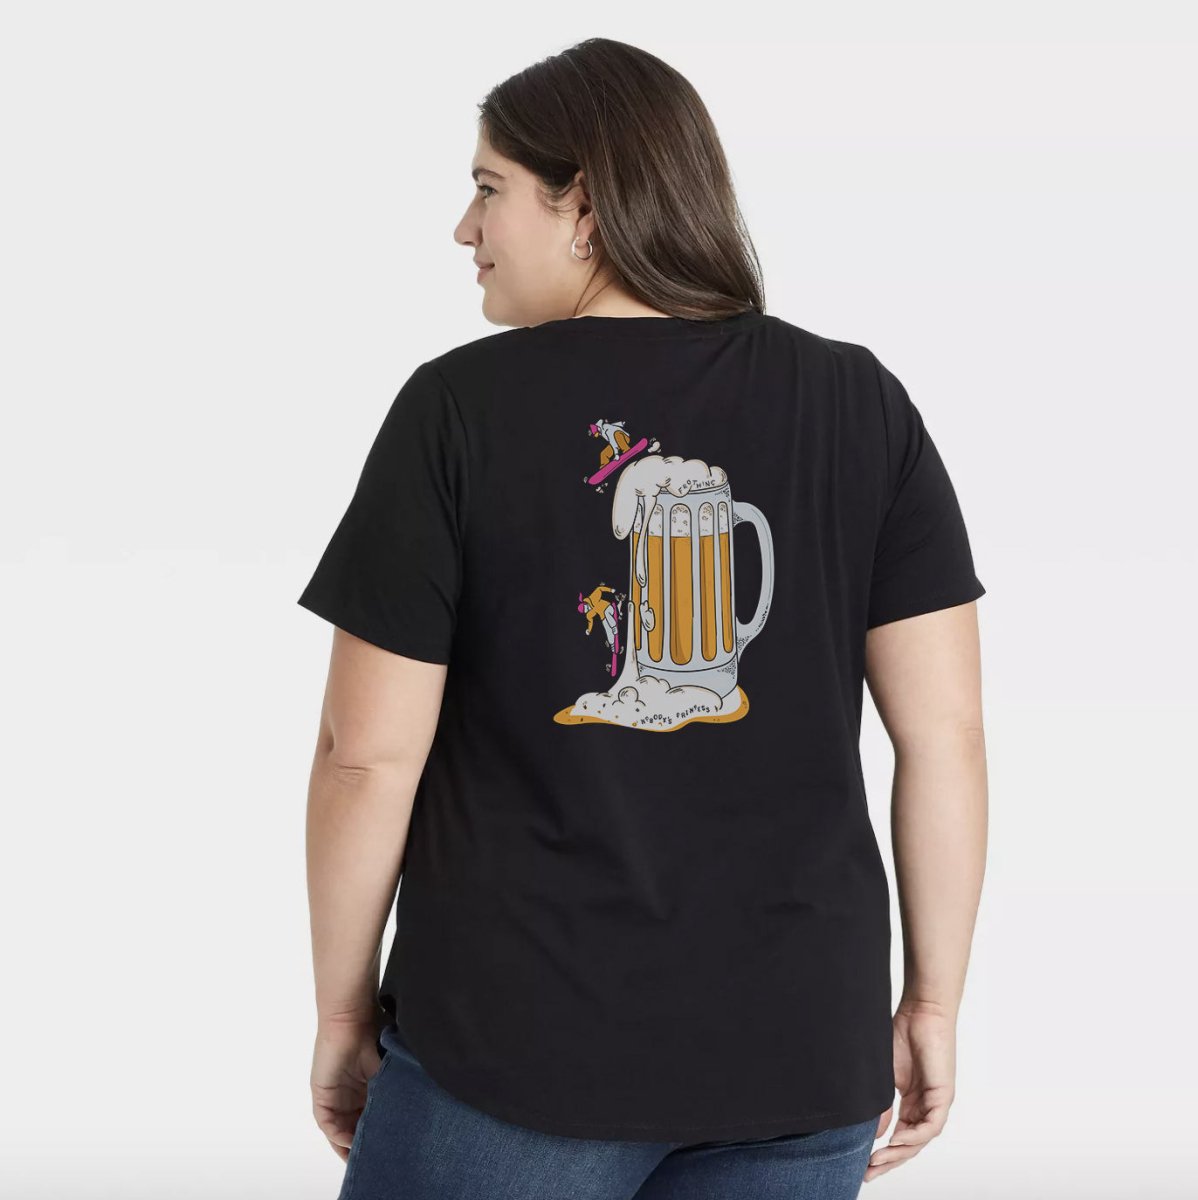 Hold My Beer Snowboarder Tee - Nobody's Princess